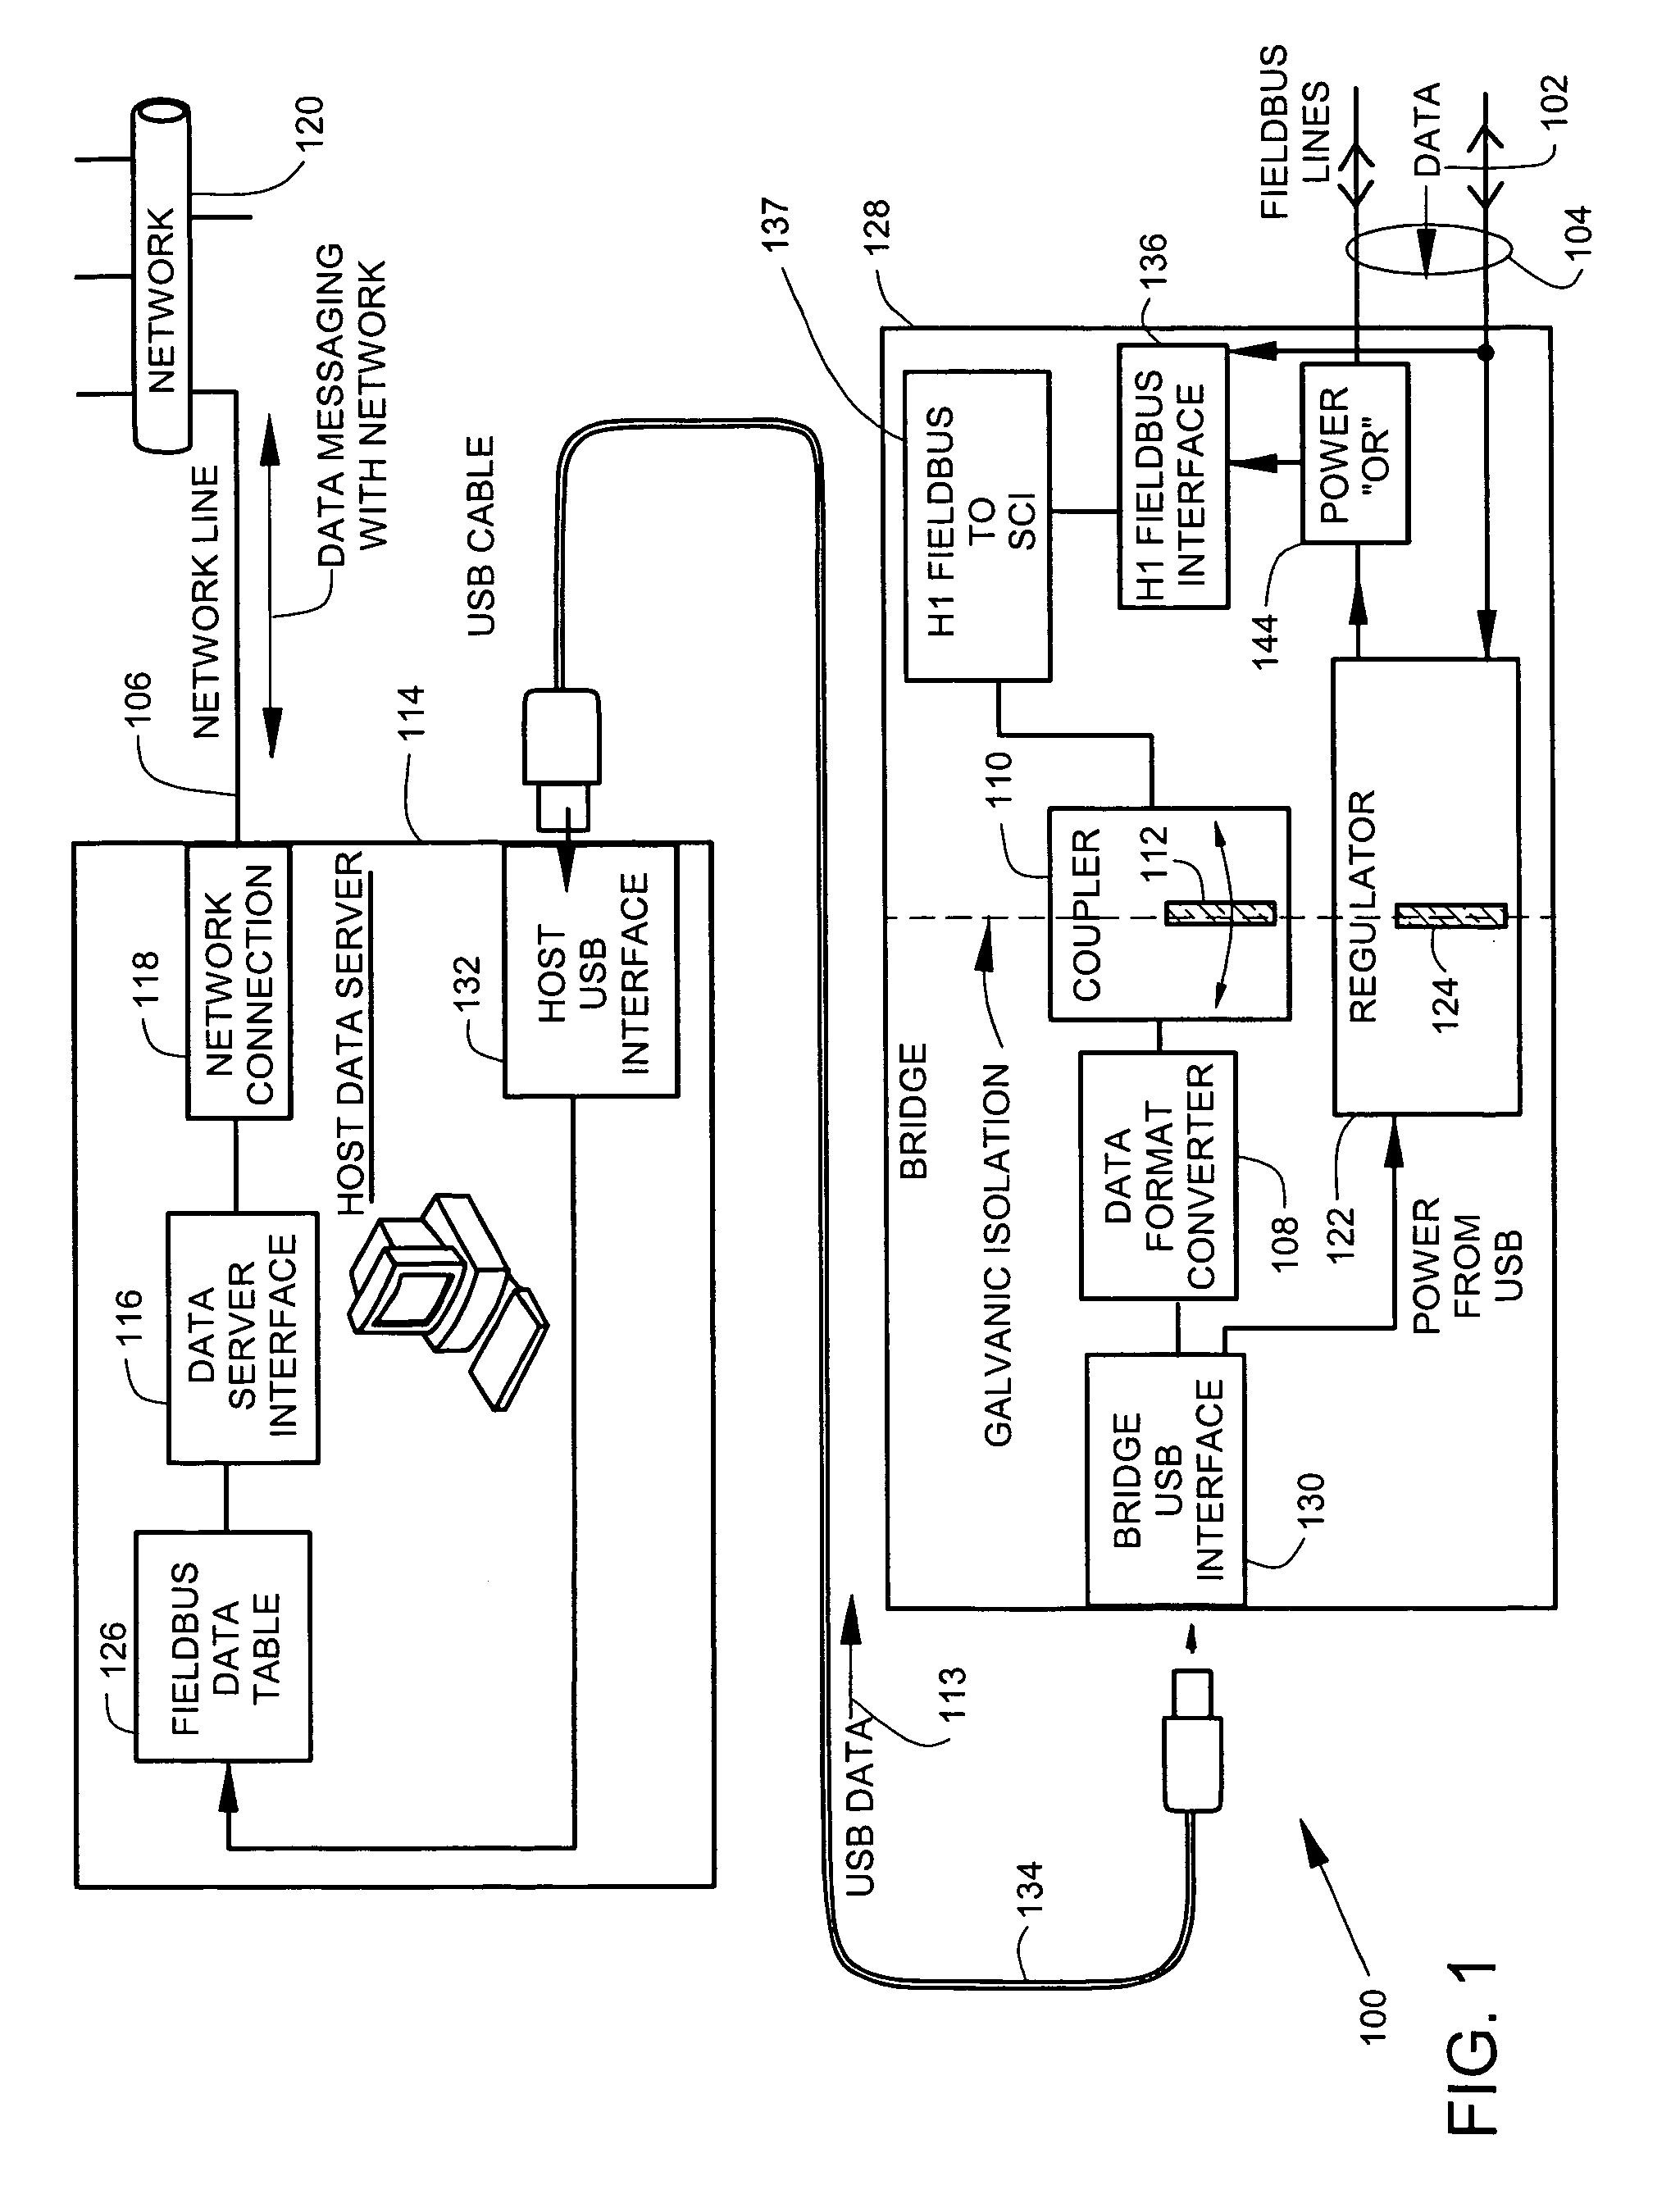 Isolating system that couples fieldbus data to a network